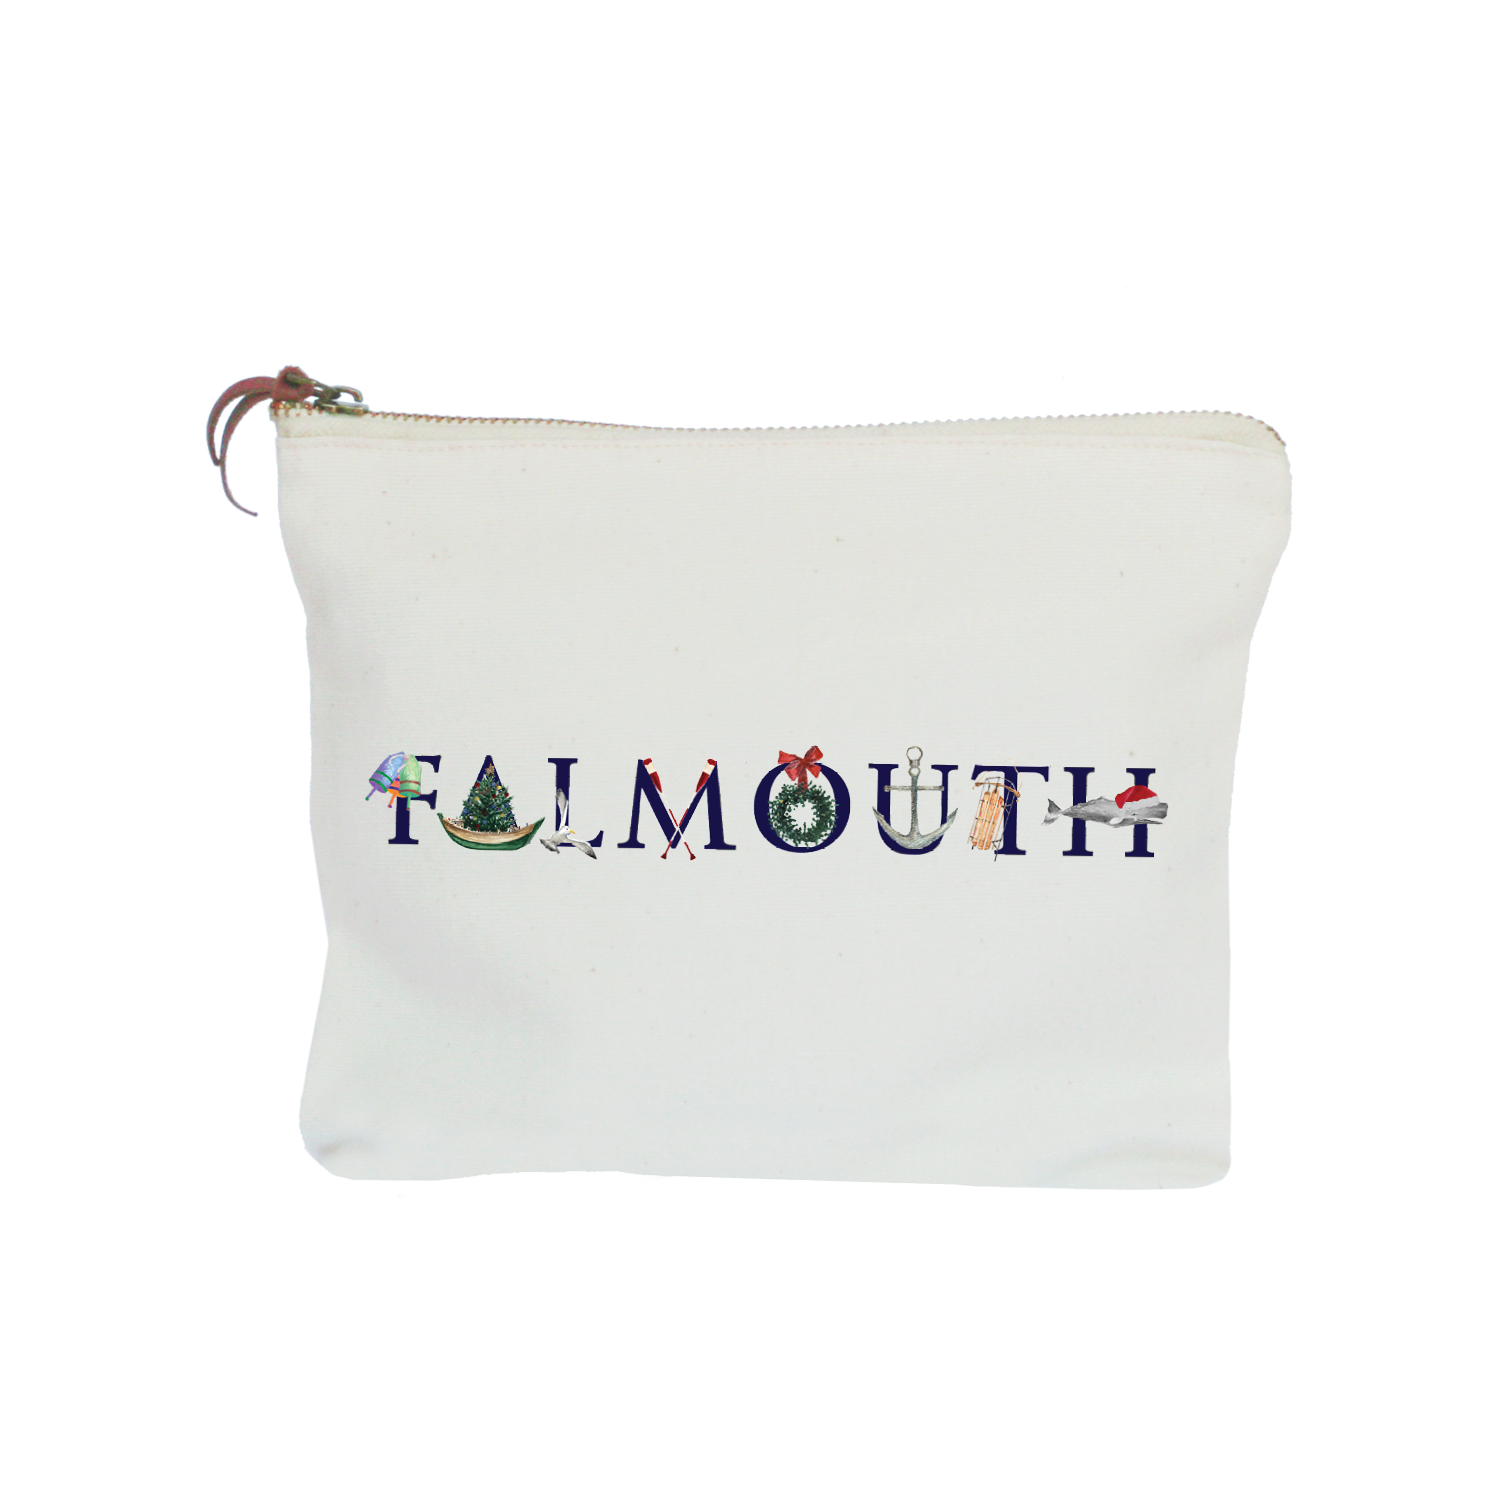 falmouth holiday zipper pouch